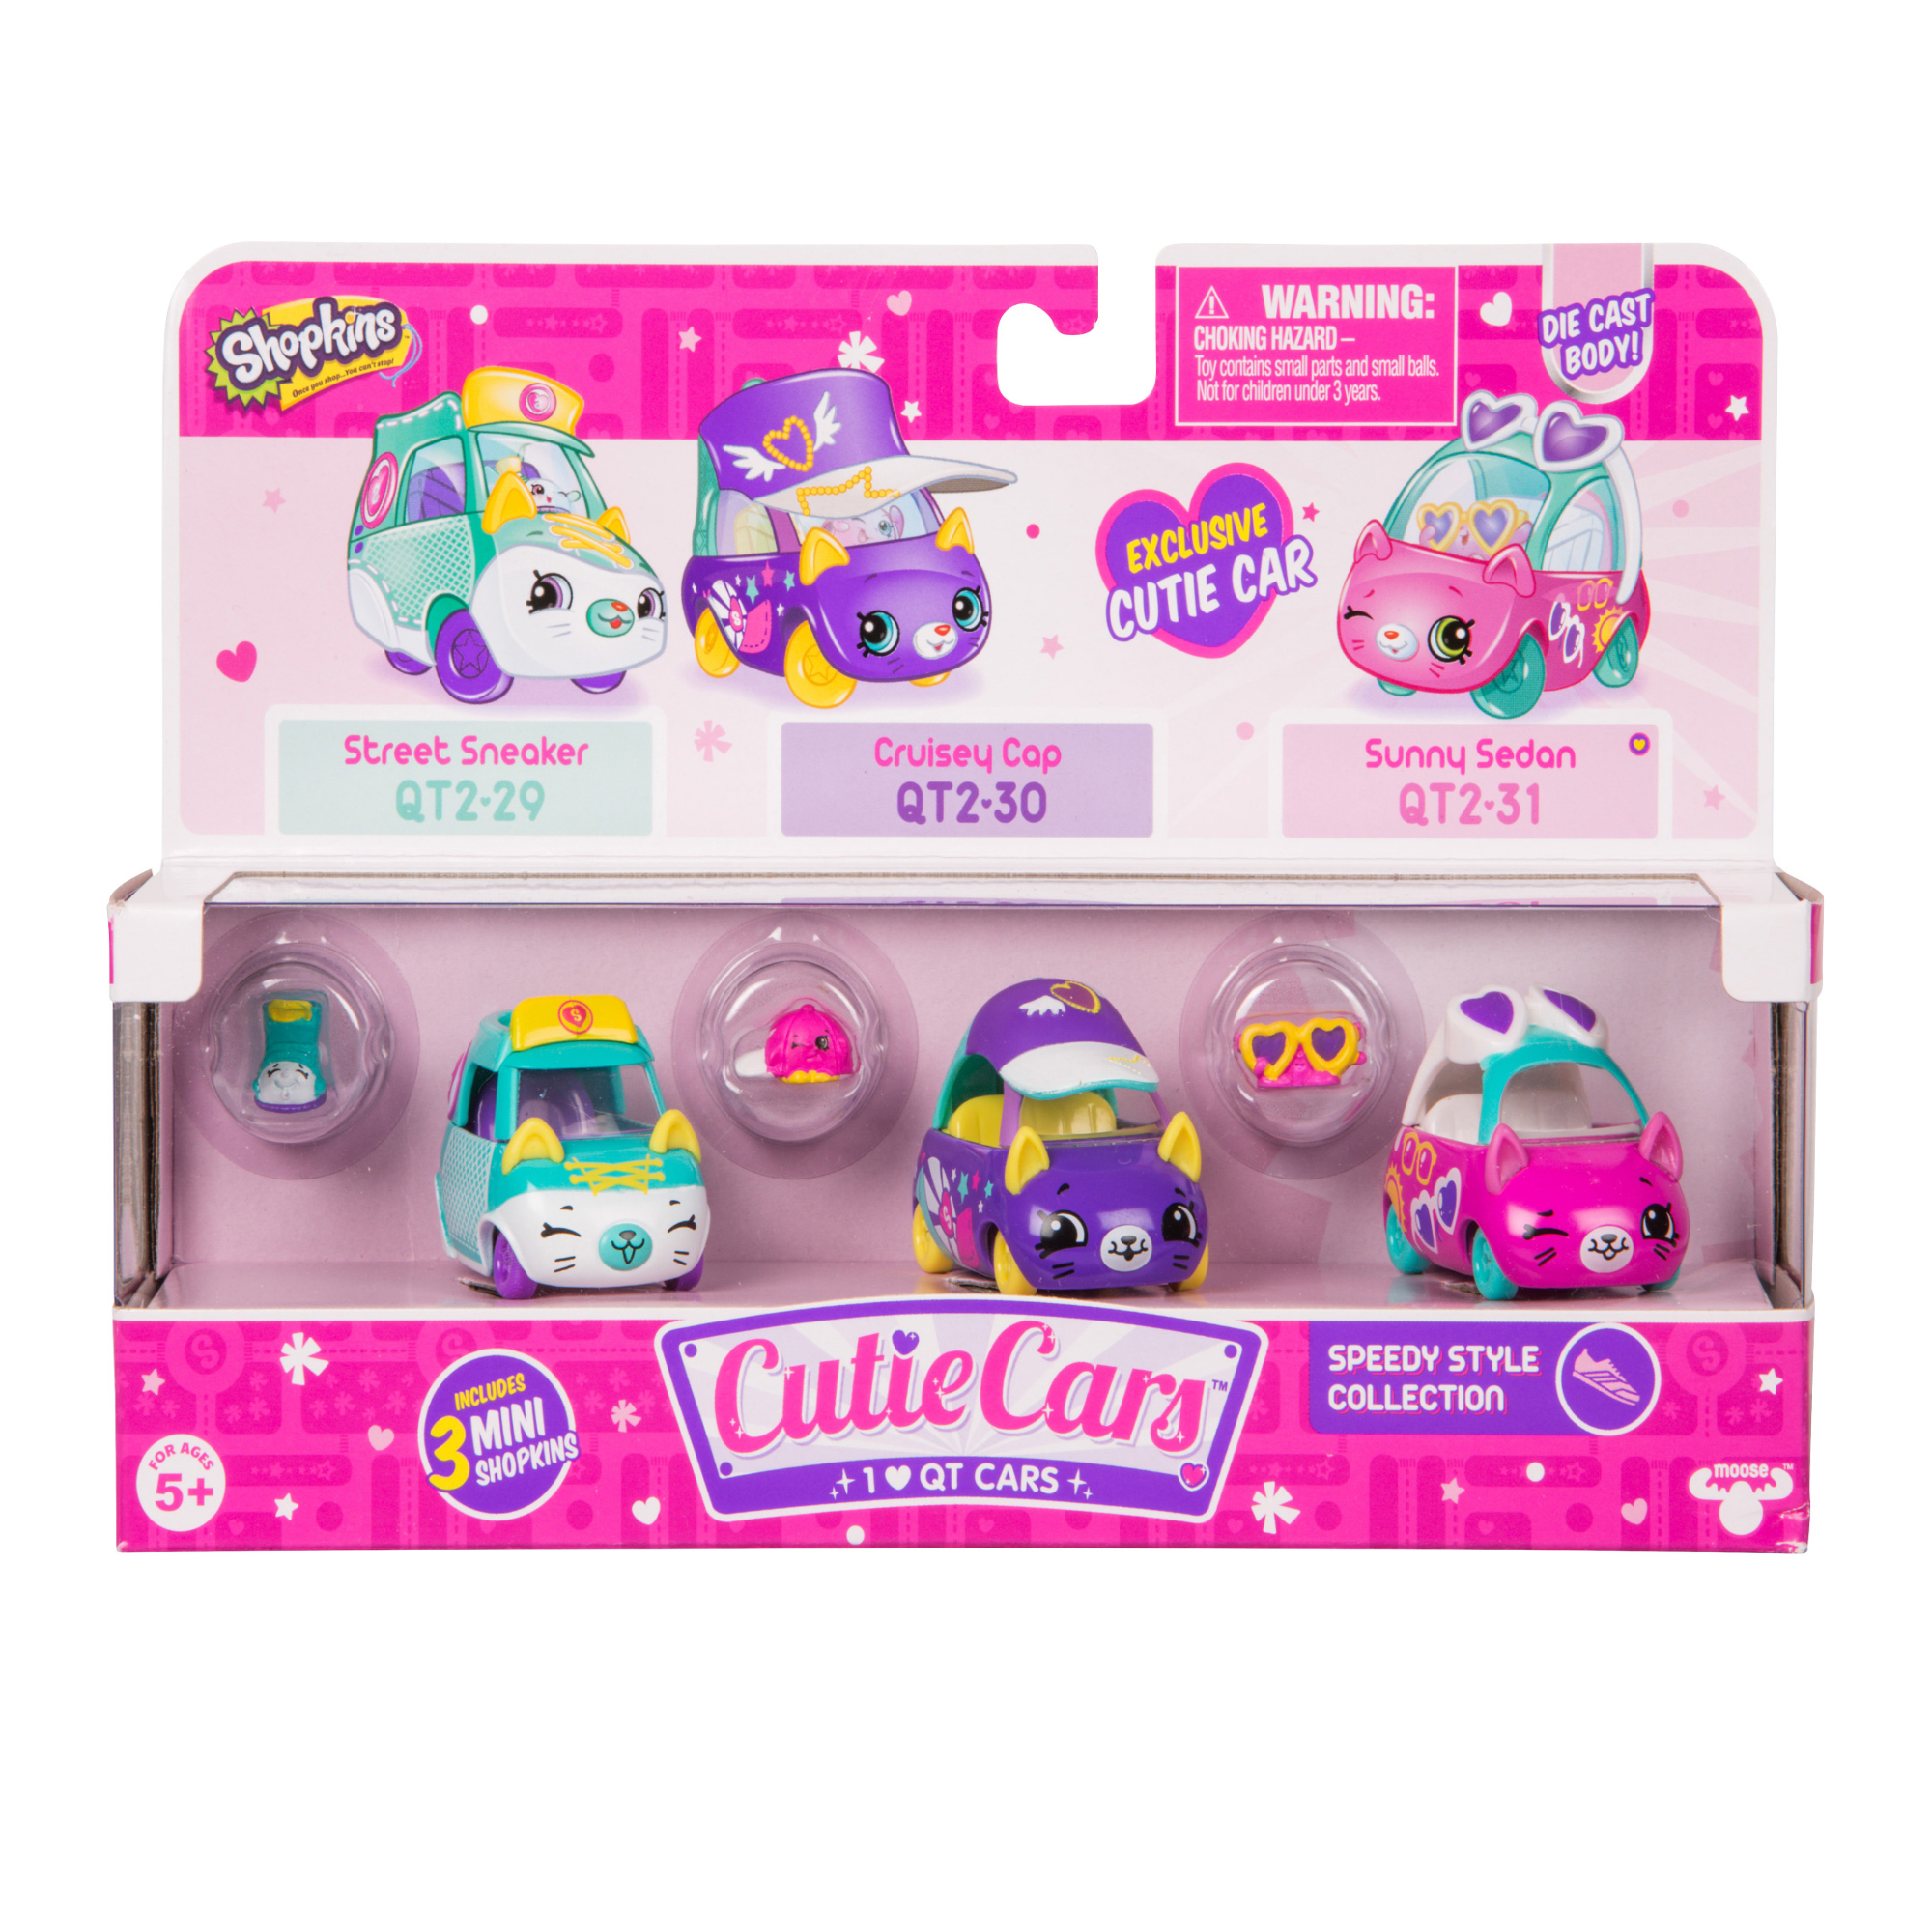 License 2 Play - Cutie Car 3 Pack, Speedy Style - image 3 of 5